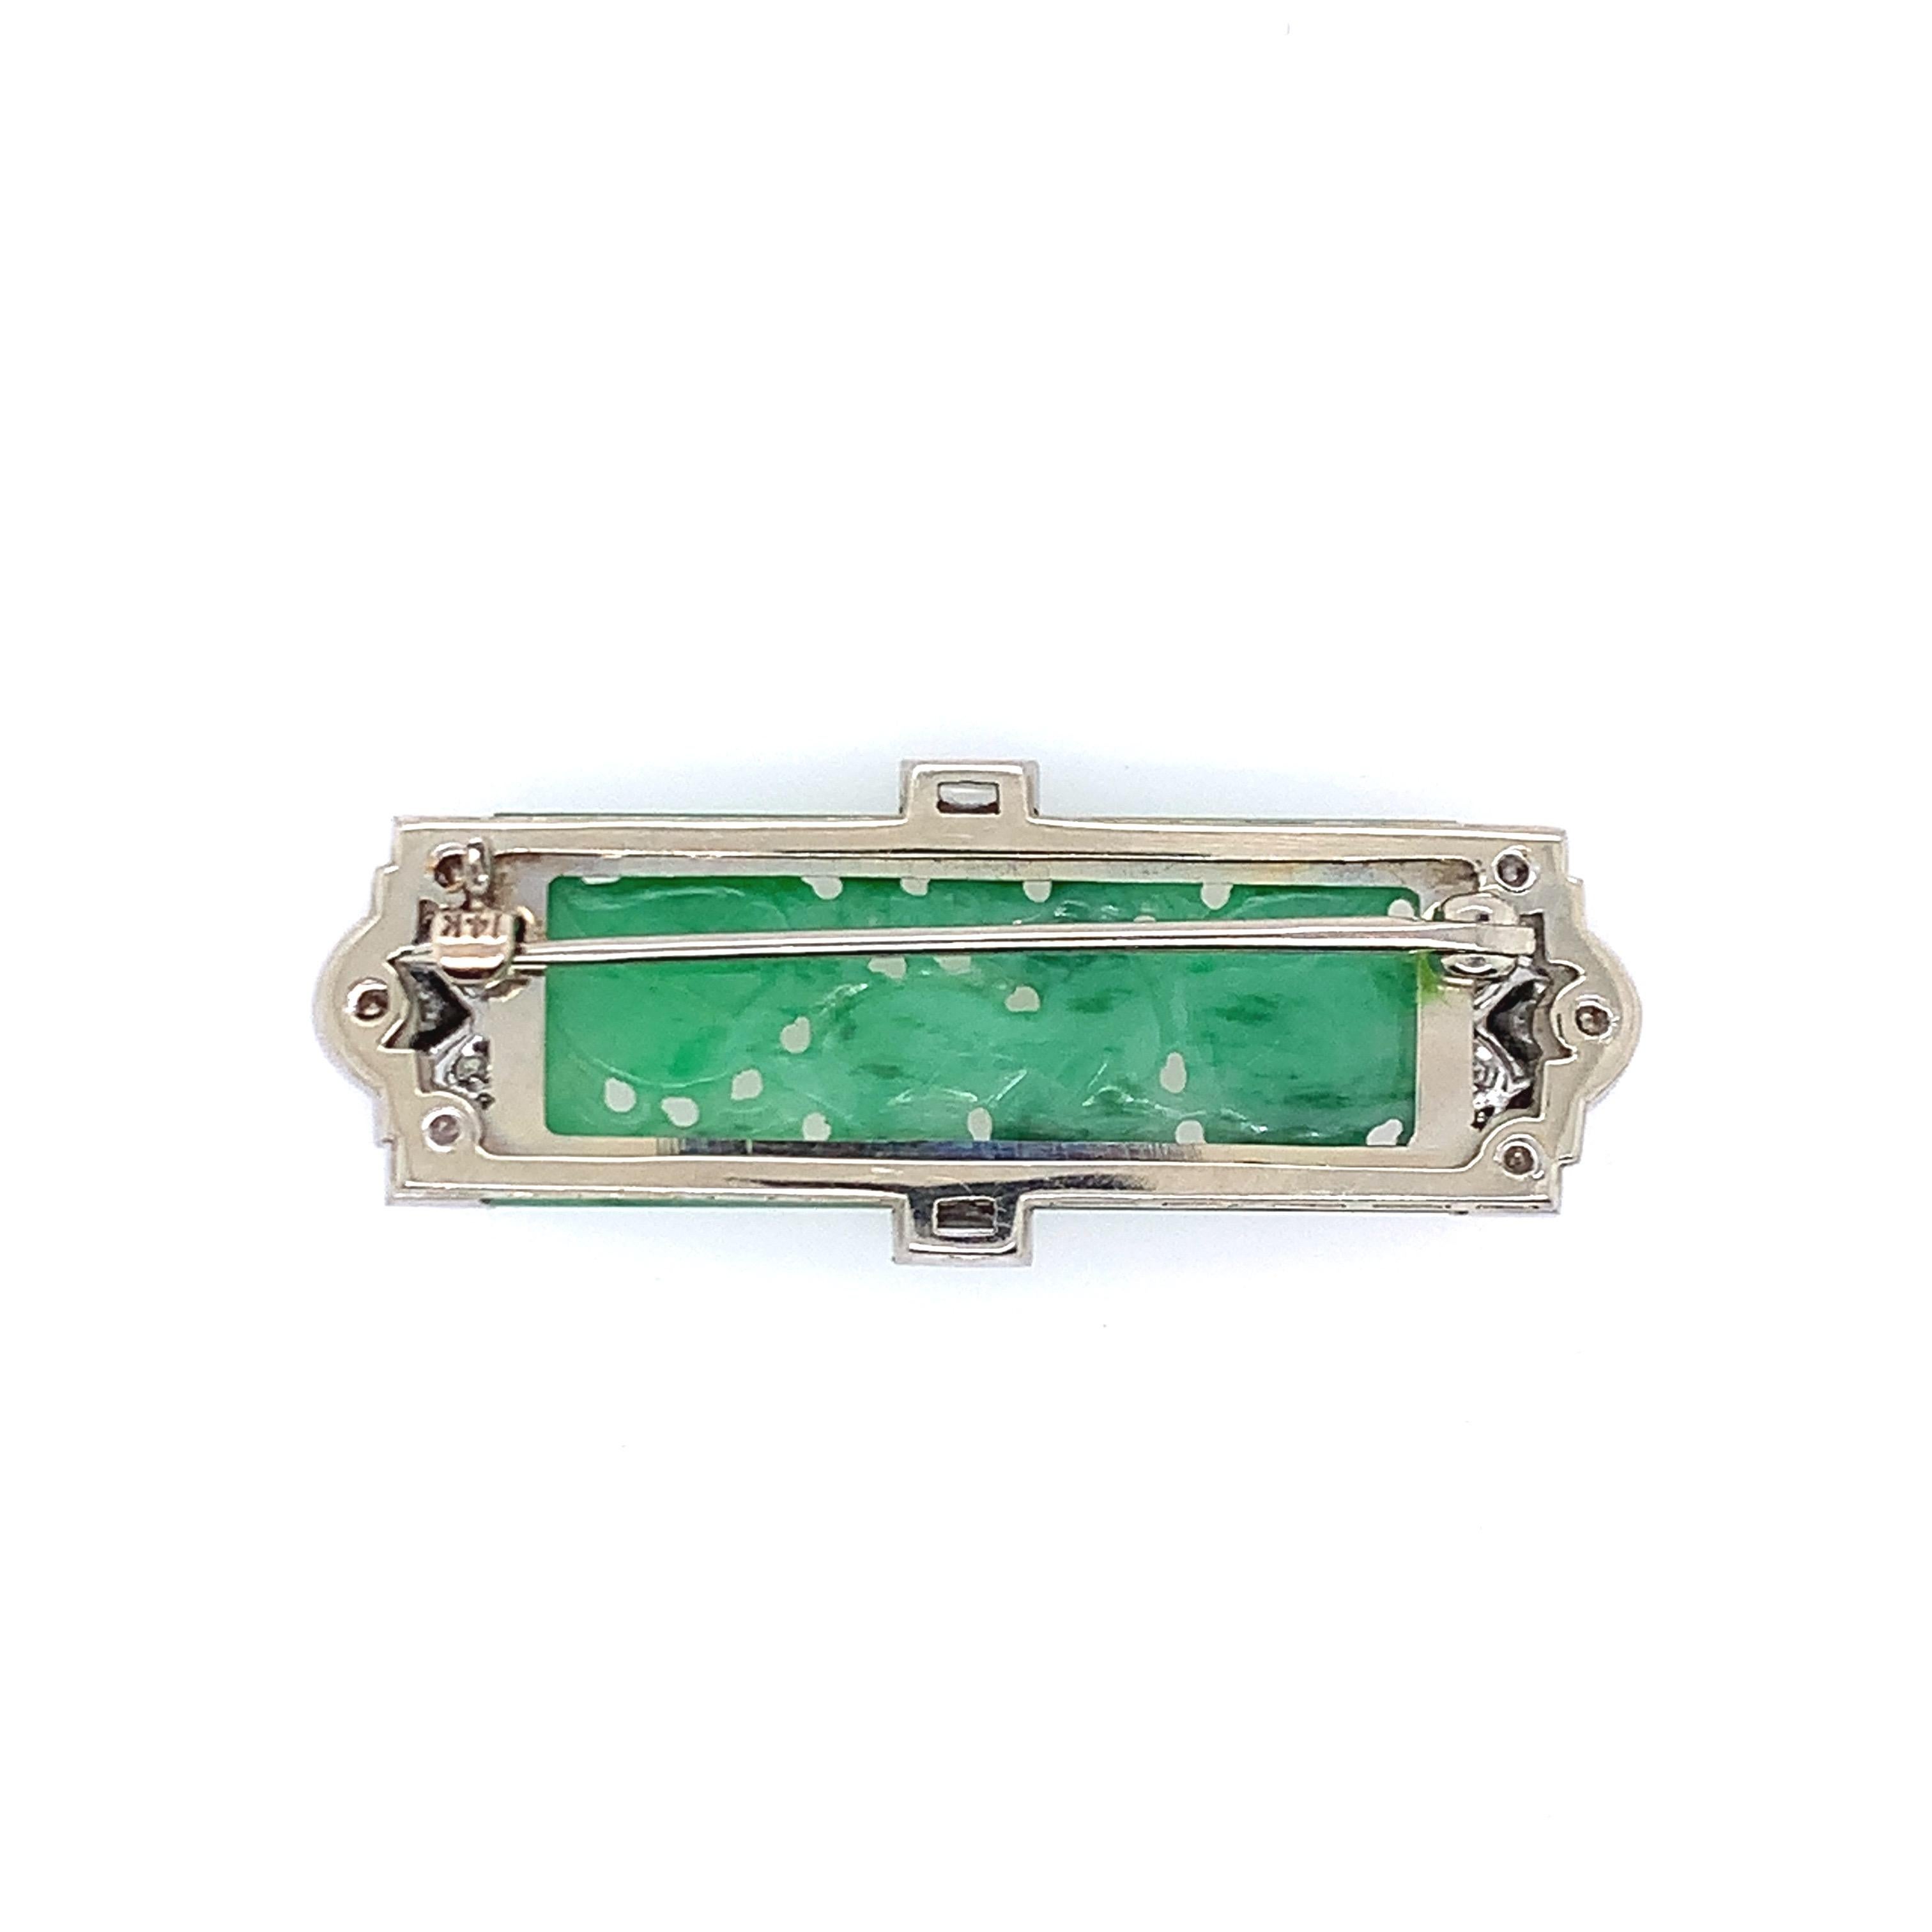 Created in the 1920s, this art deco brooch is set in platinum and consists of diamonds totaling 0.50 carat as well as natural, type A jade at its center. The length is 0.63 inch and the width is 1.75 inches. The total weight is 8.3 grams.
